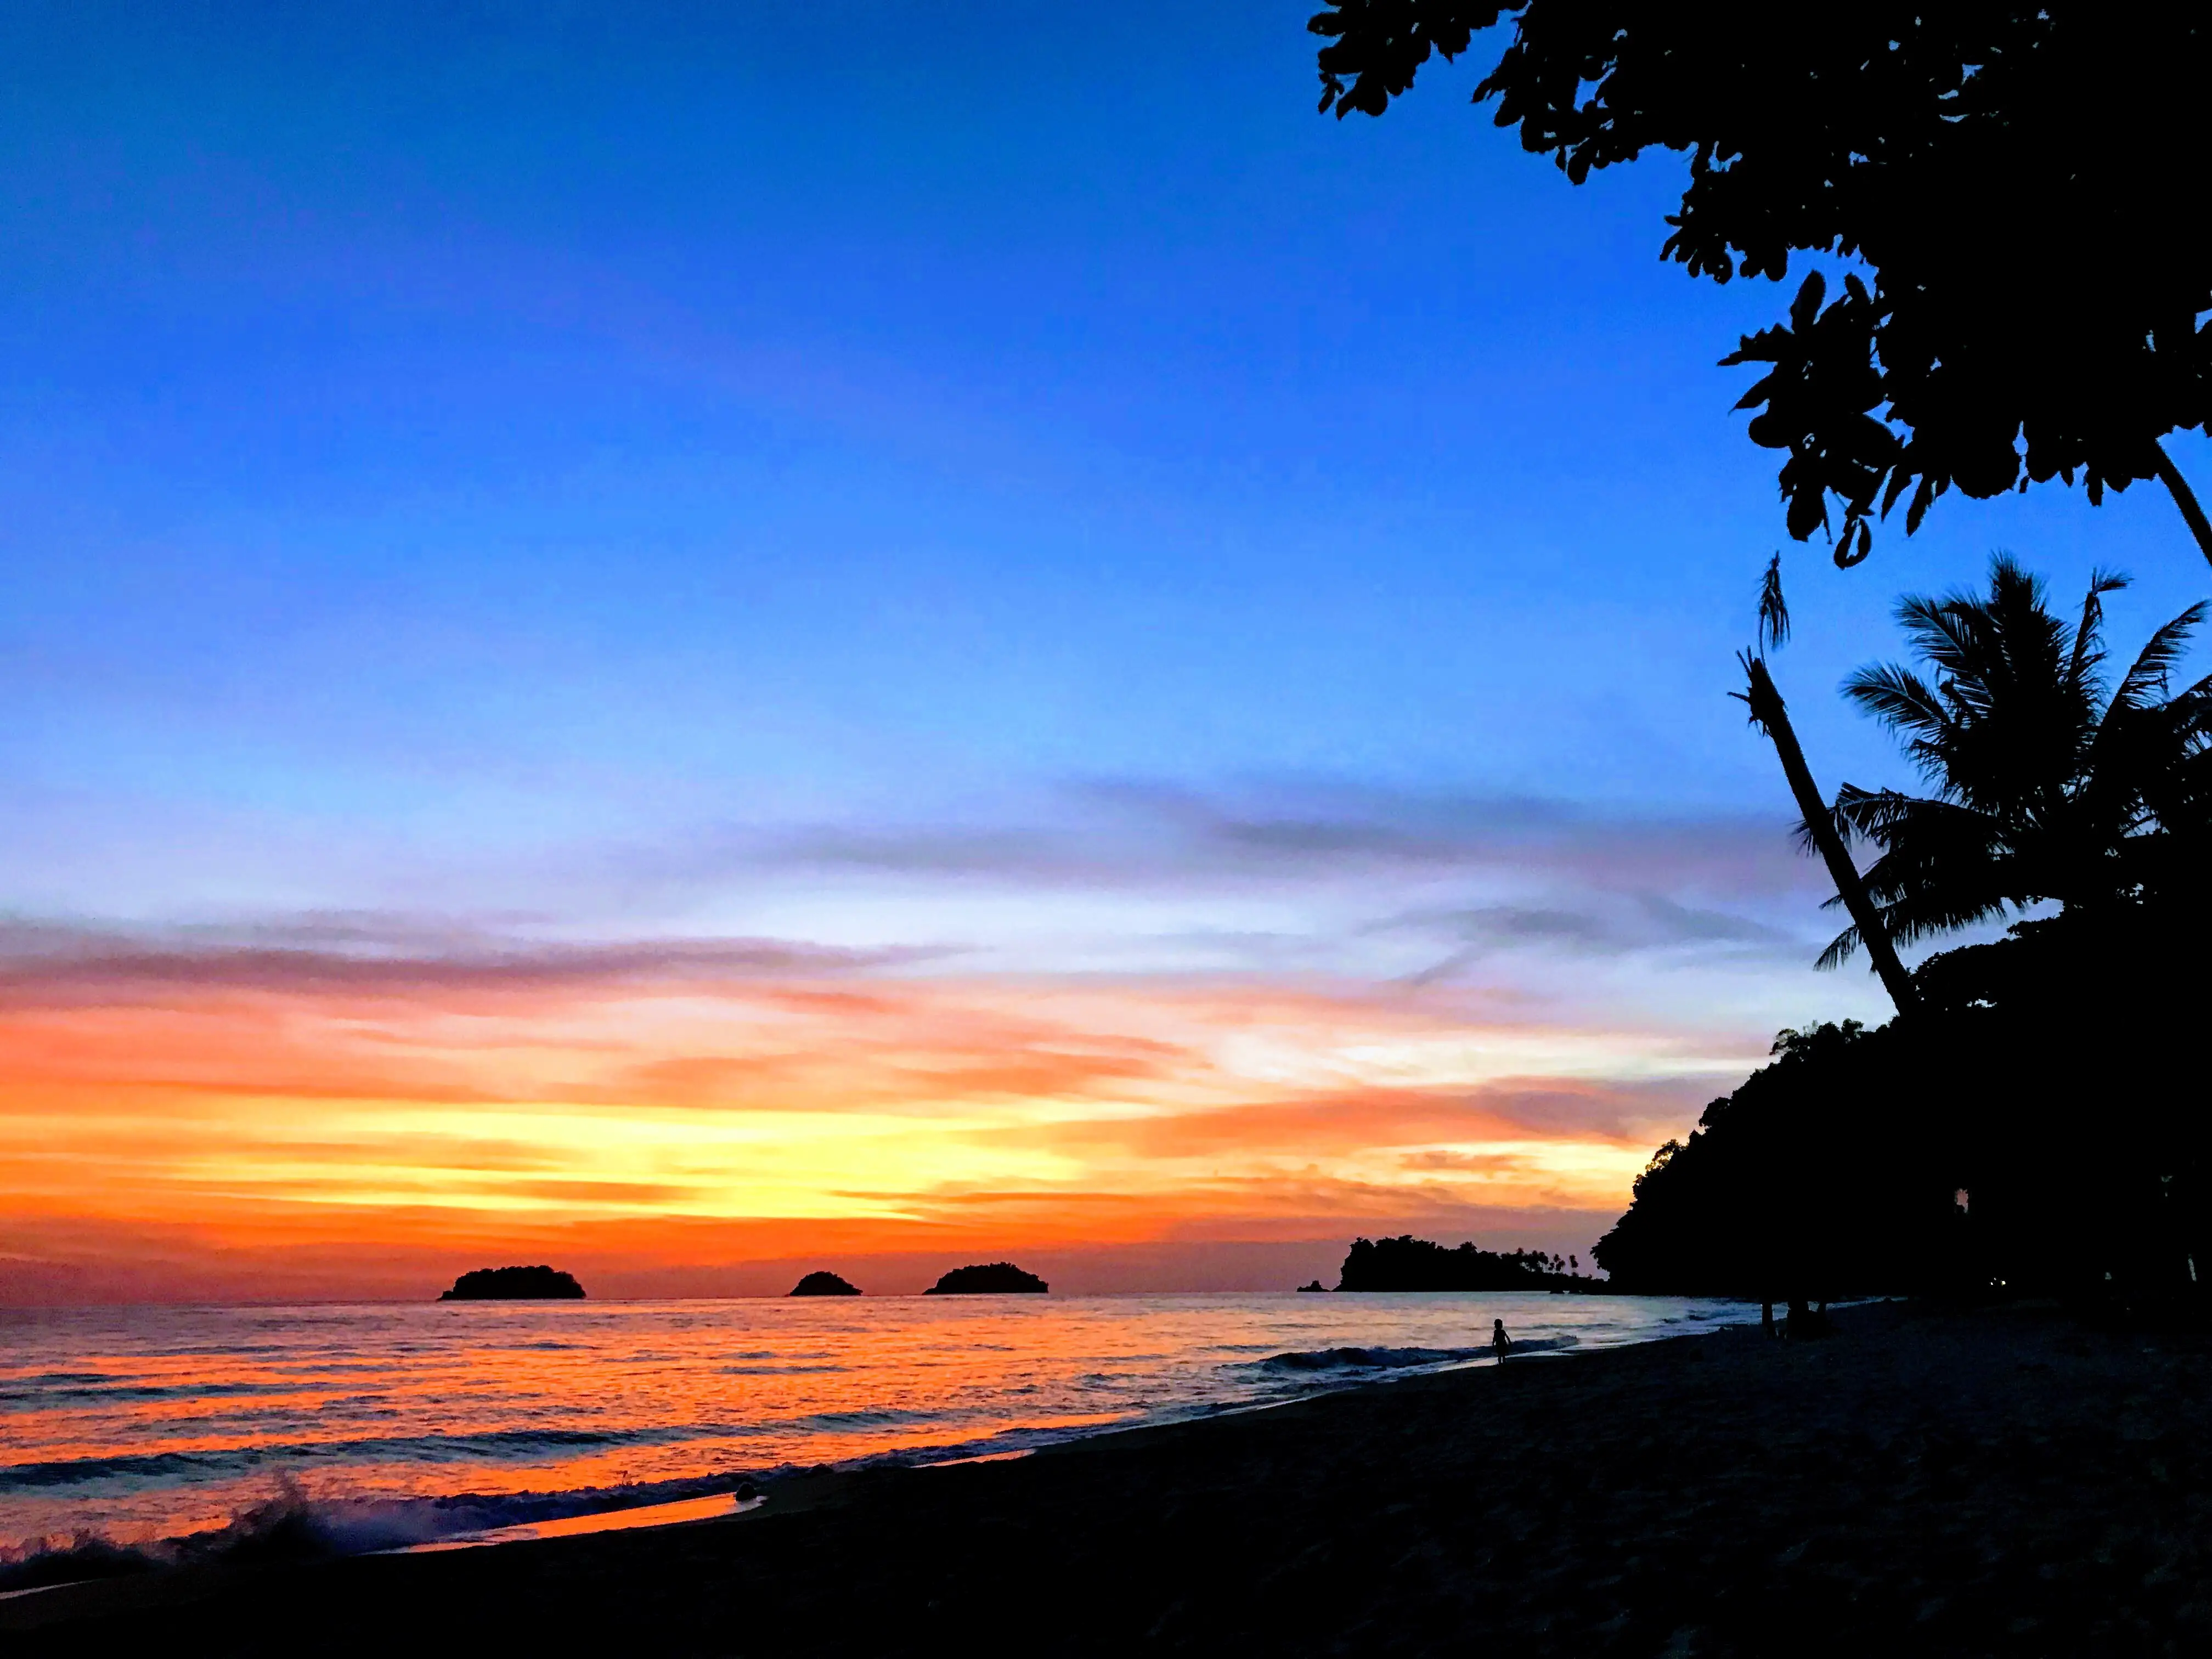 Sunset at Lonely Beach, Koh Chang, Thailand 